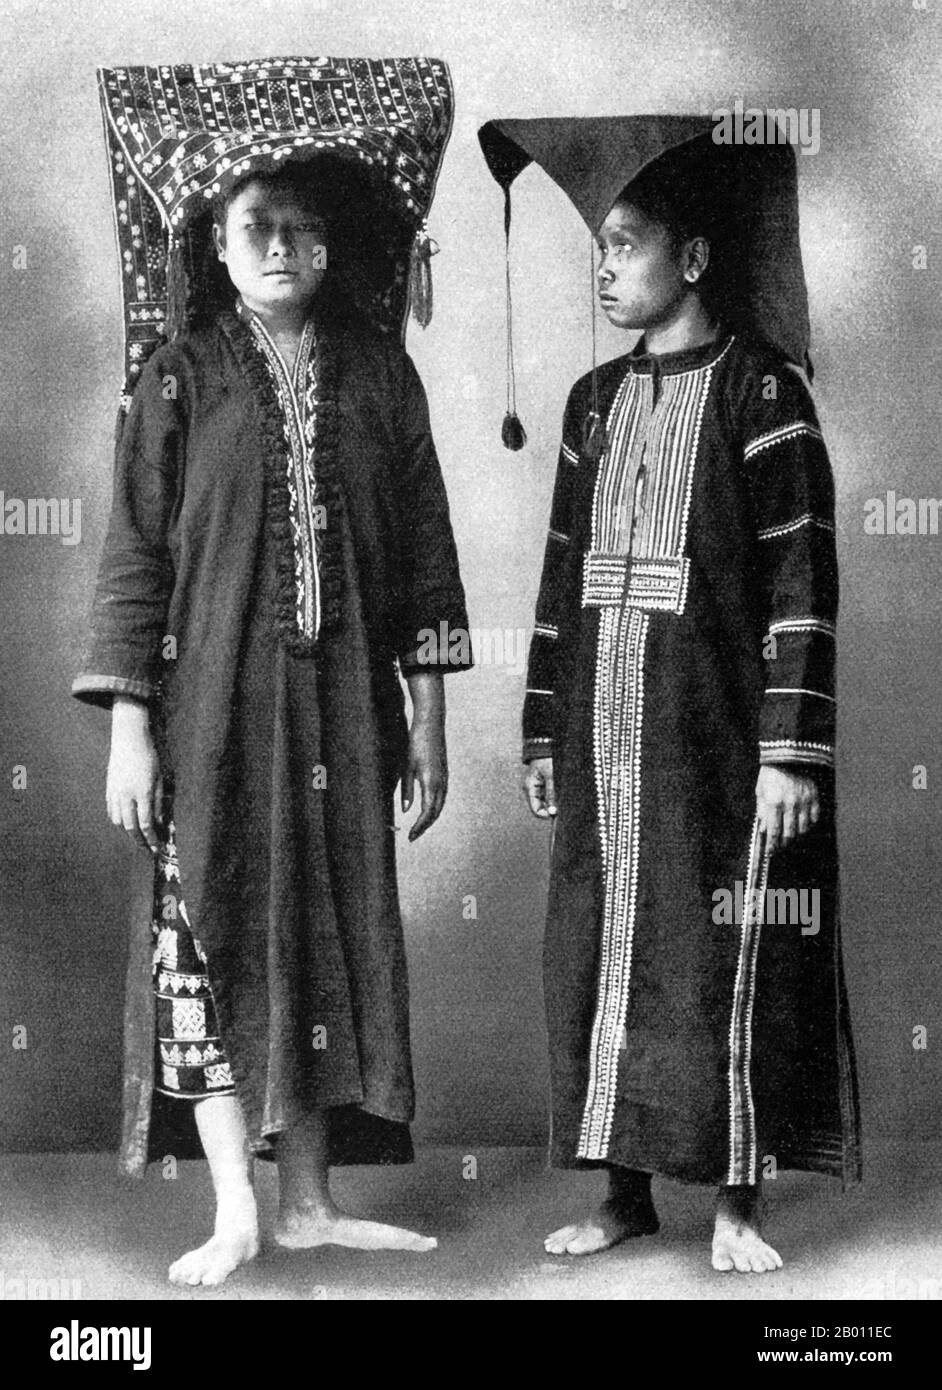 Thailand: A Yao Mien woman (left) and a Lahu woman (right), both of northern Thailand in traditional dress. Photo by Ernst Haeckel (1834-1919), c. 1900.  The Yao nationality (its great majority branch is also known as Mien; Pinyin: Yáo zú; Vietnamese: người Dao) is a government classification for various minorities in China. They form one of the 55 ethnic minority groups officially recognized by the People's Republic of China, where they reside in the mountainous terrain of the southwest and south. Stock Photo